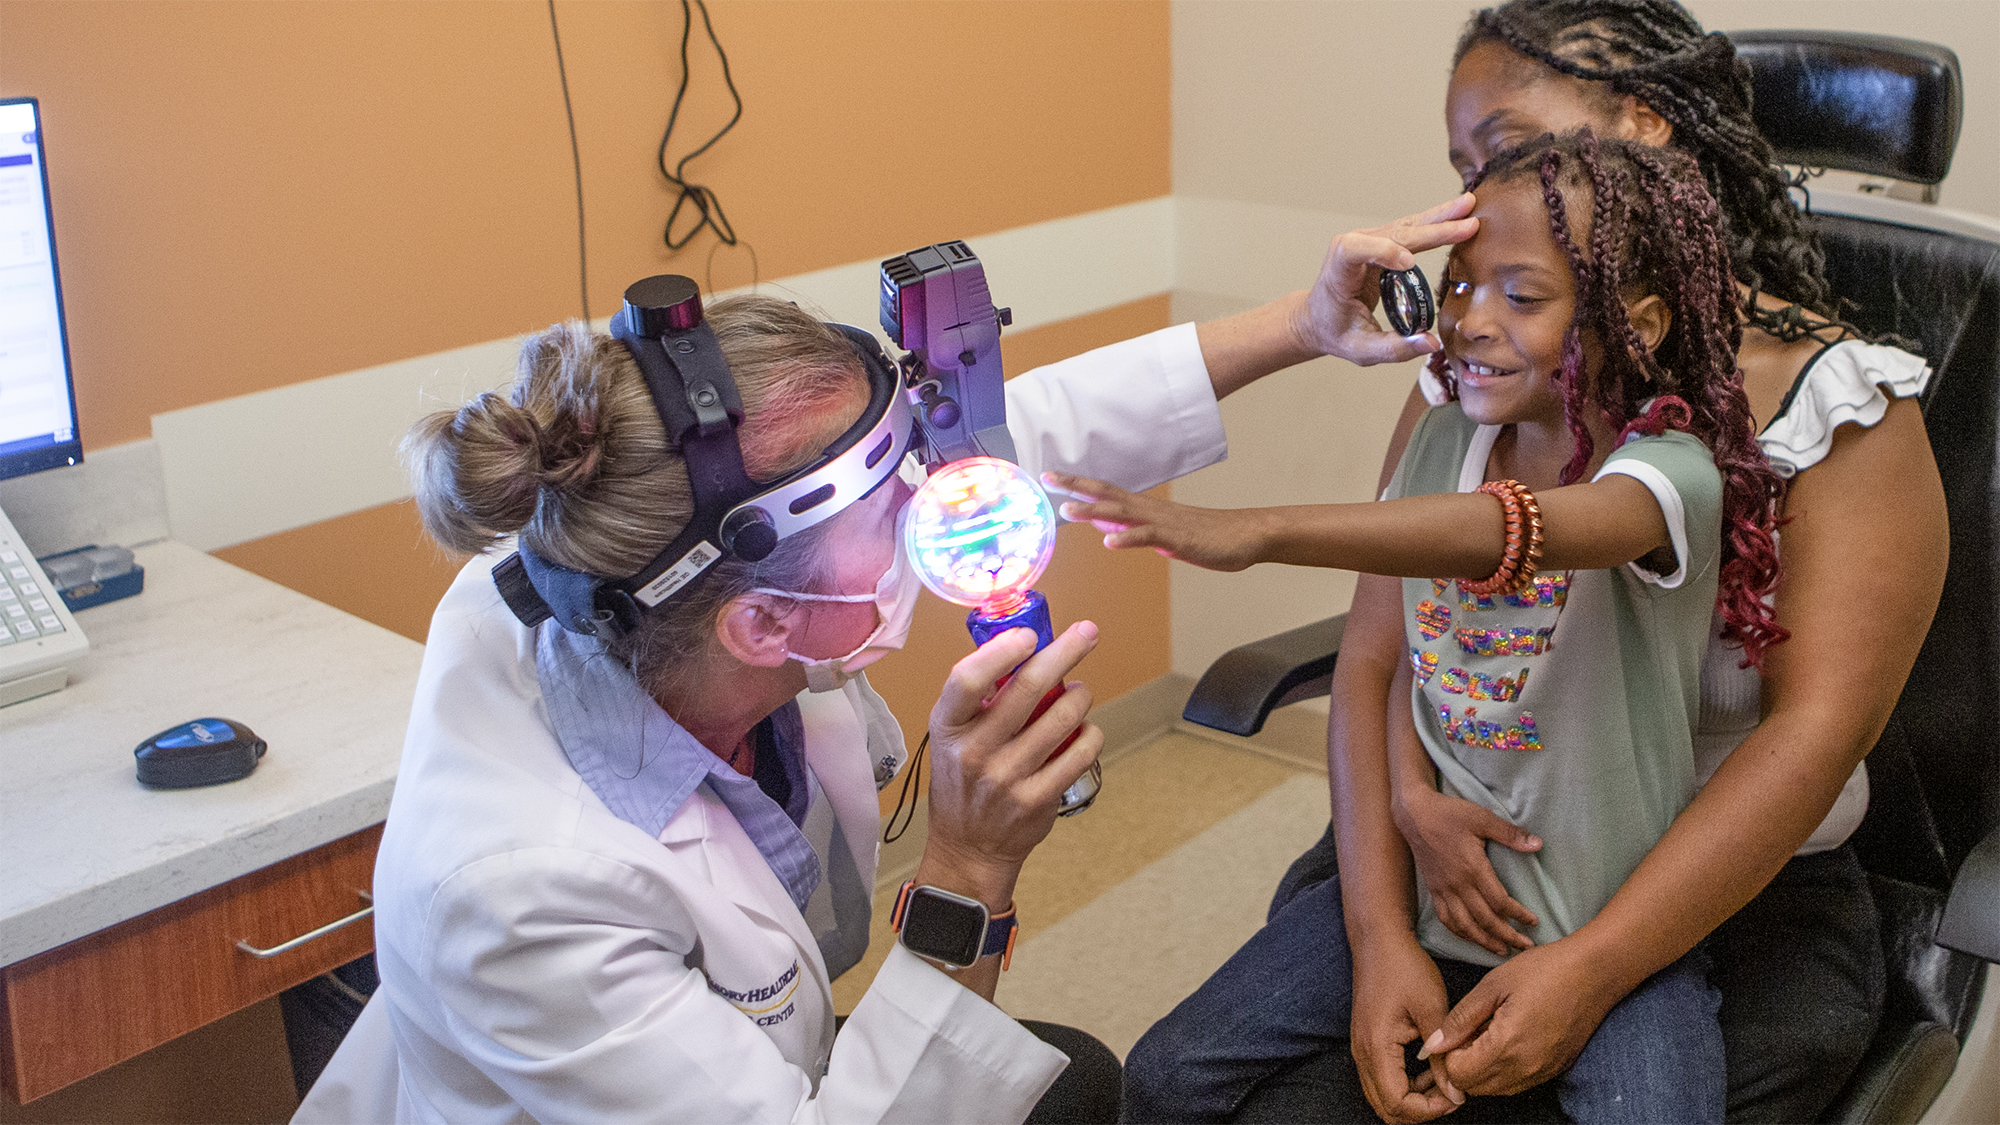 Dr. Amy Hutchinson performing a vision test on a young girl who is sitting in her mother's lap